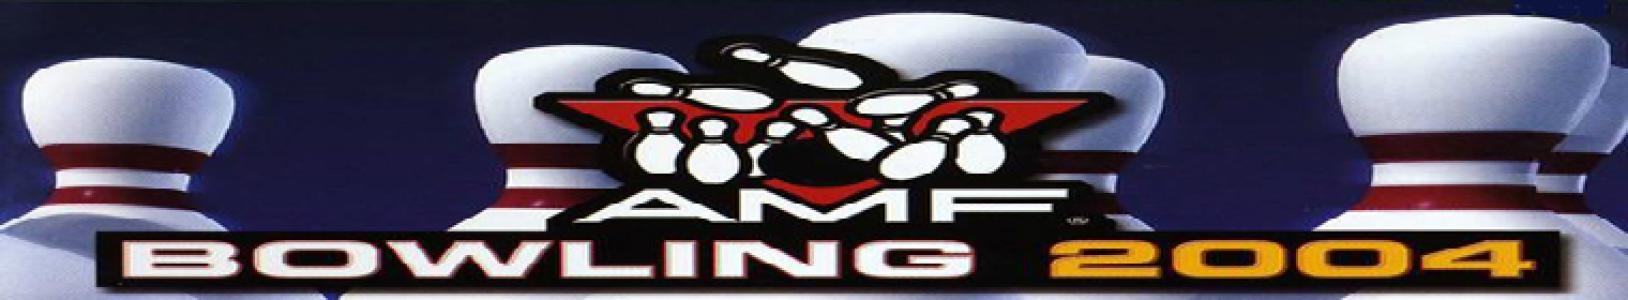 AMF Bowling 2004 banner